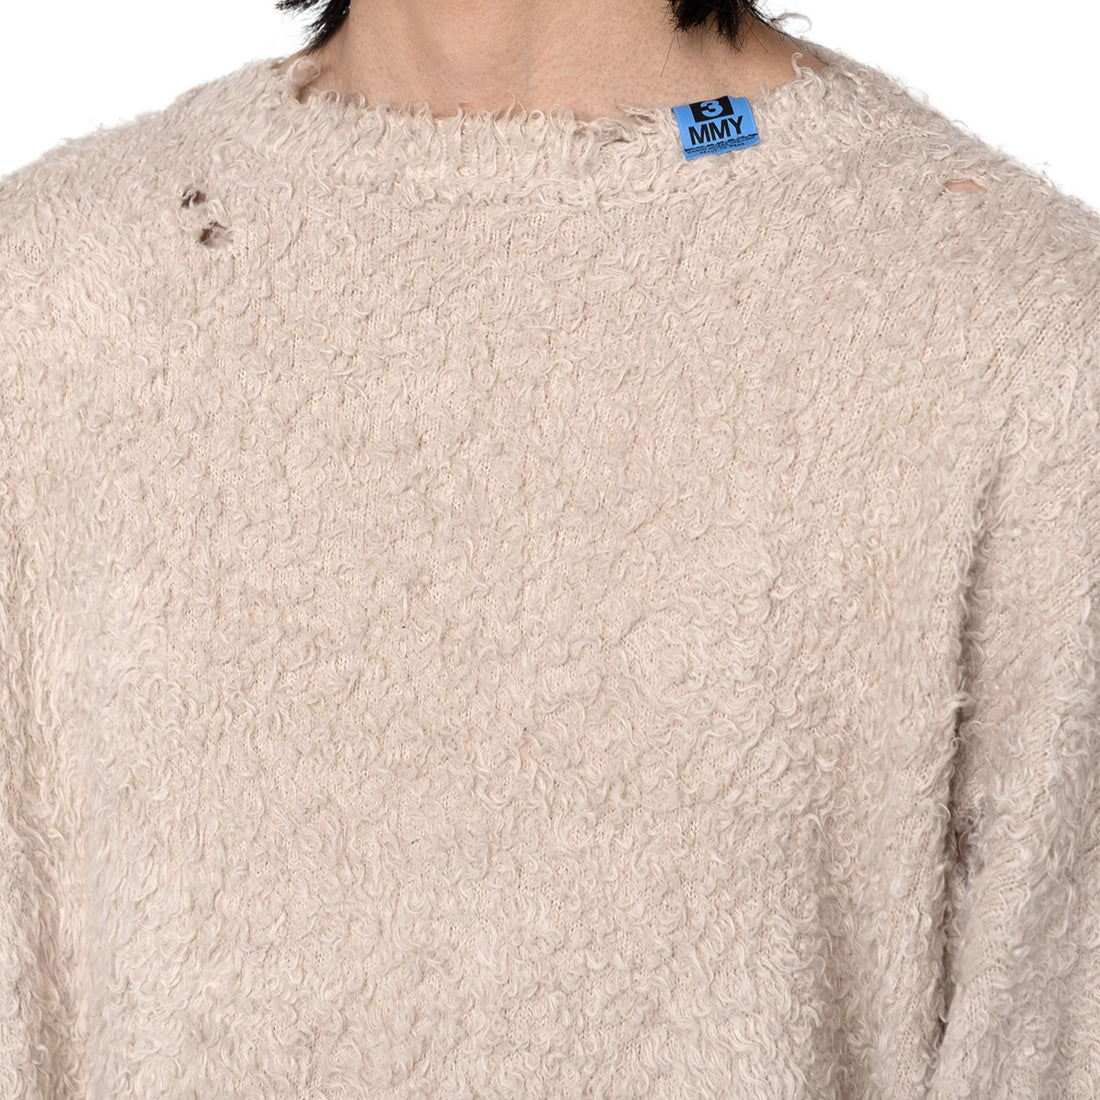 [MAISON MIHARA YASUHIRO]Cotton Brushed Pullover Knit/BEIGE(A11SW522)